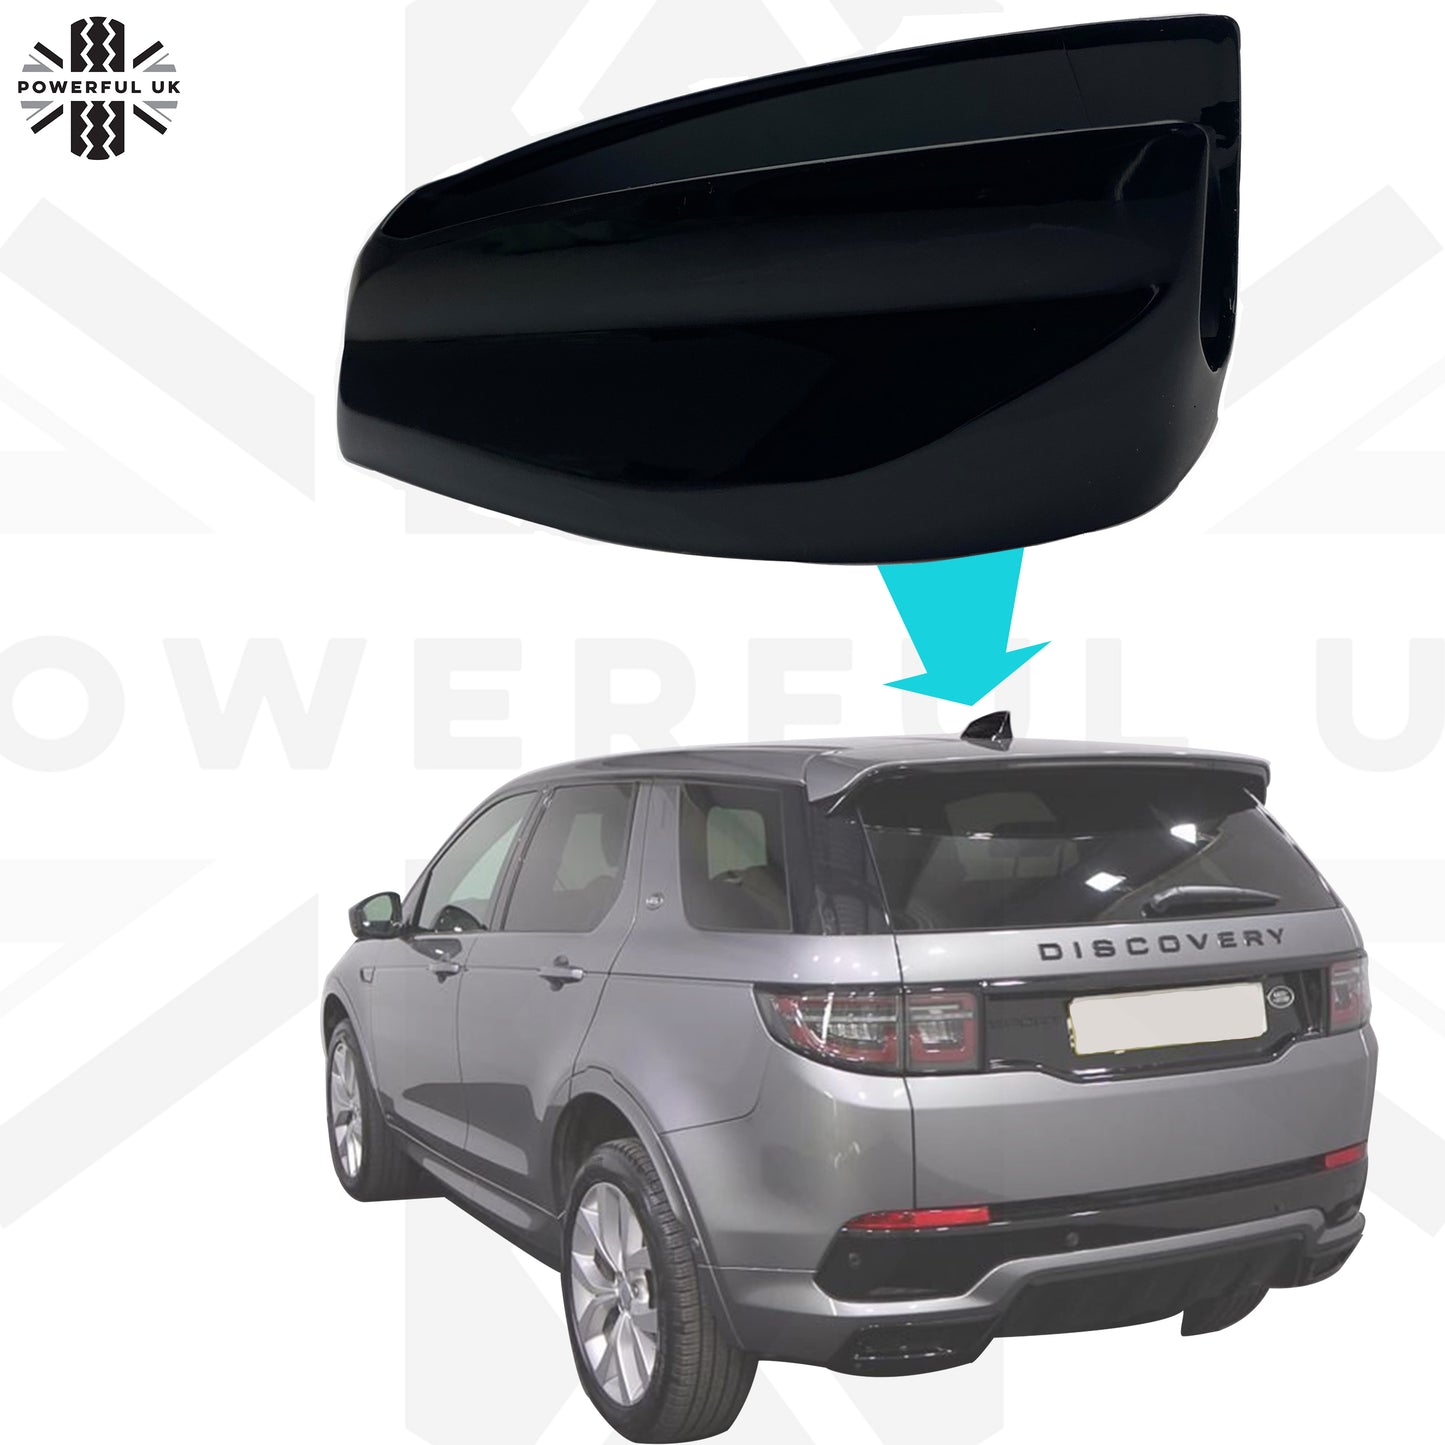 Genuine Gloss Black Roof Aerial Cover for Land Rover Discovery Sport 2020+